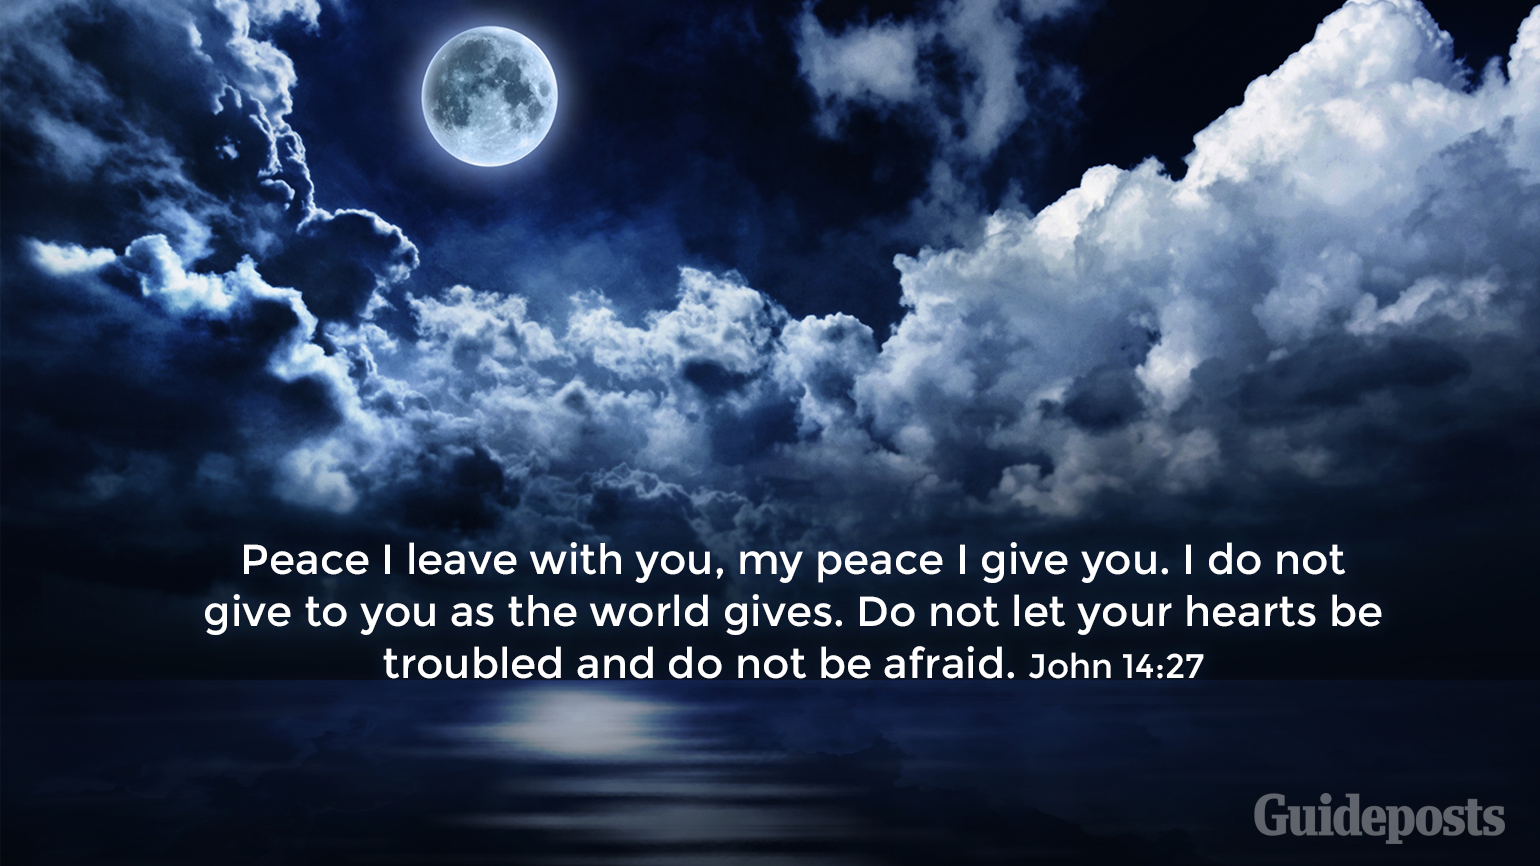 7 Bible Verses for a Good Night's Sleep "Peace I leave with you, my peace I give you. I do not give to you as the world gives. Do not let your hearts be troubled and do not be afraid." John 14:27 Faith and Prayer Bible Resources